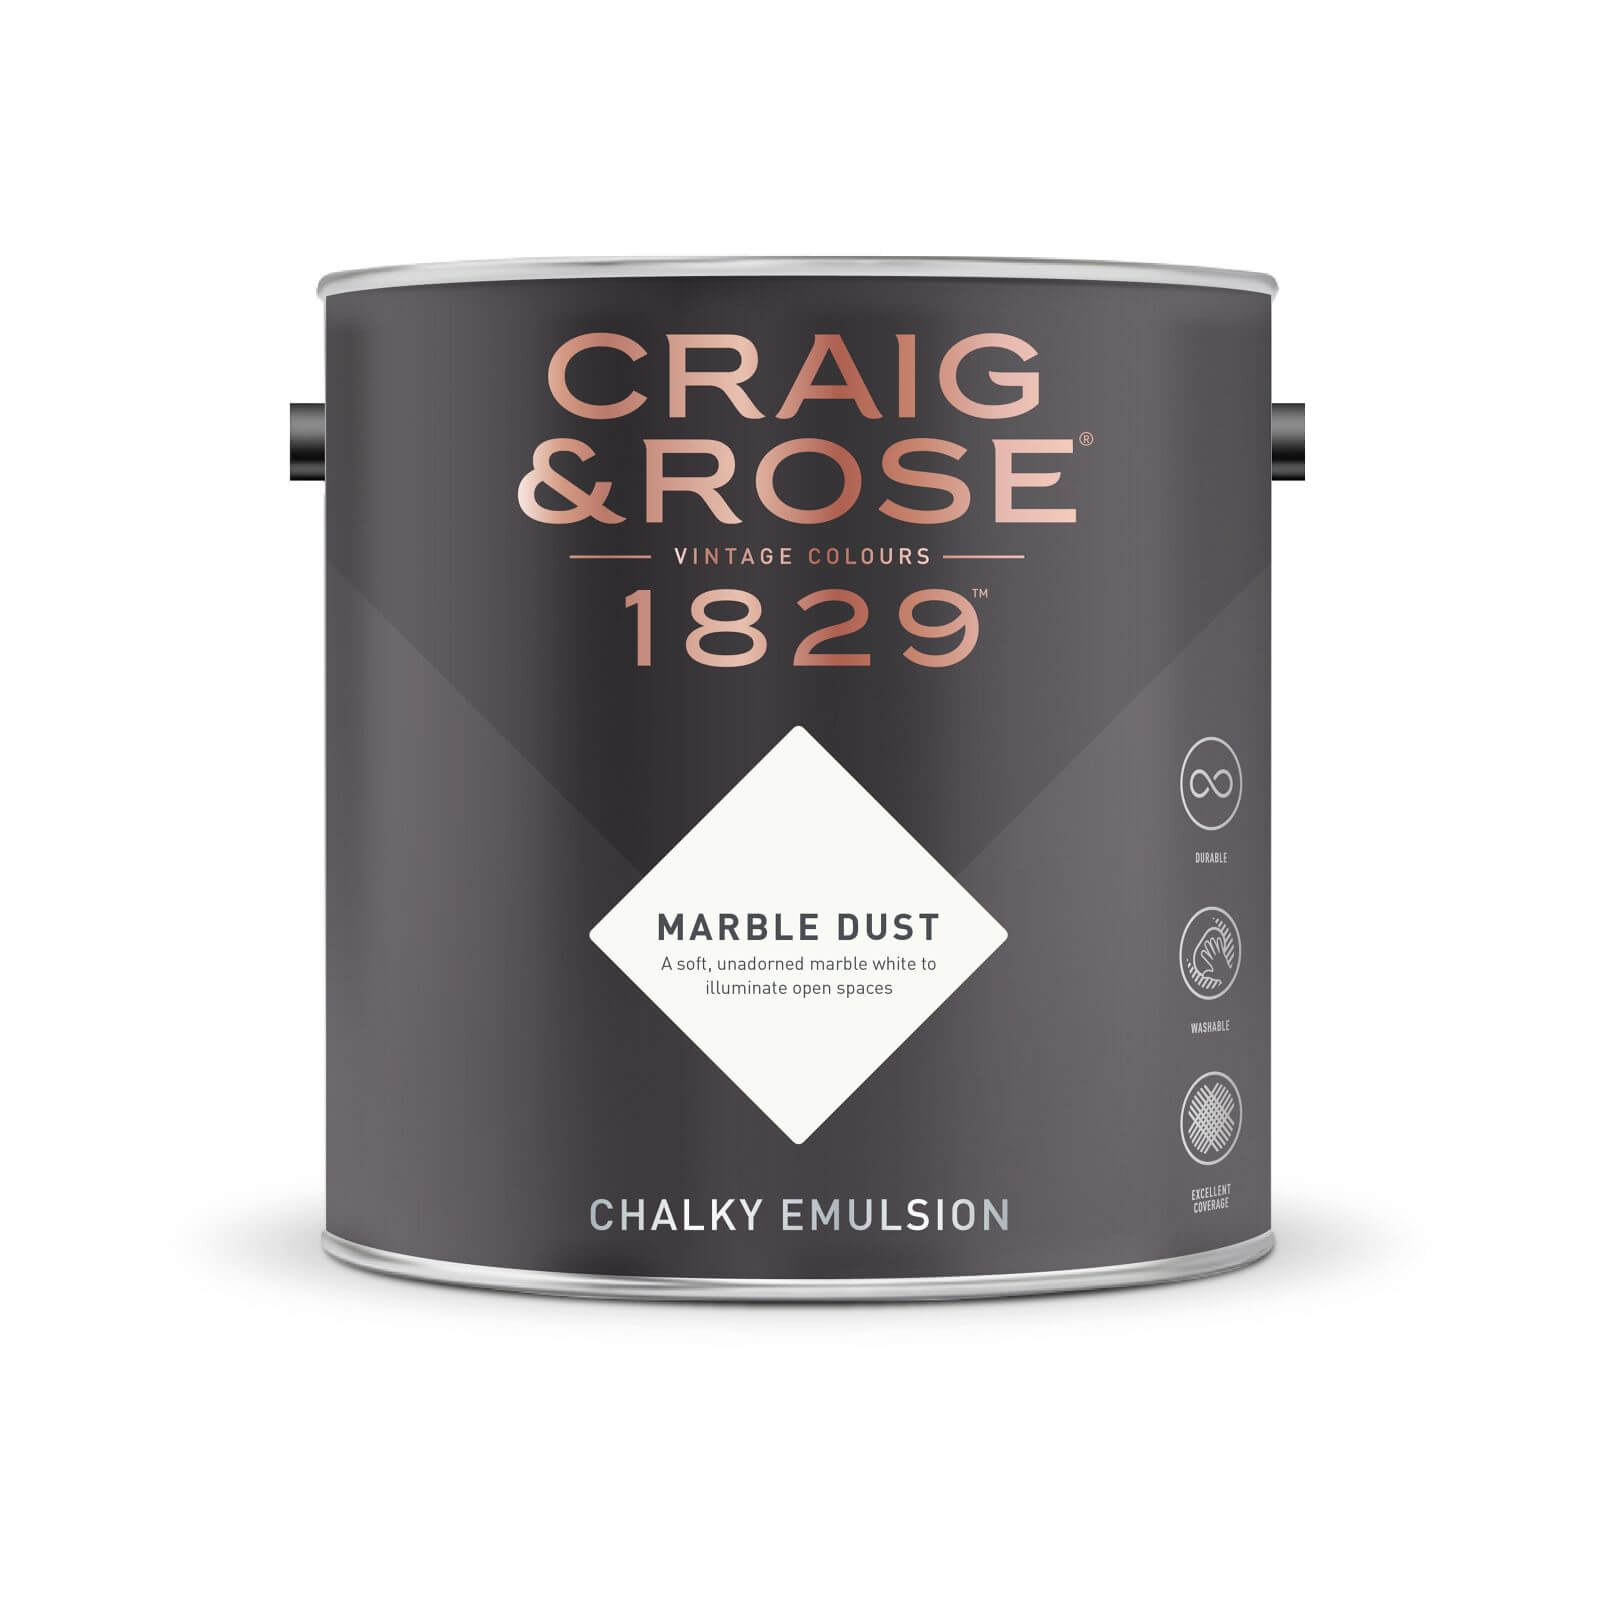 Craig & Rose 1829 Chalky Emulsion Paint Marble Dust - Tester 50ml